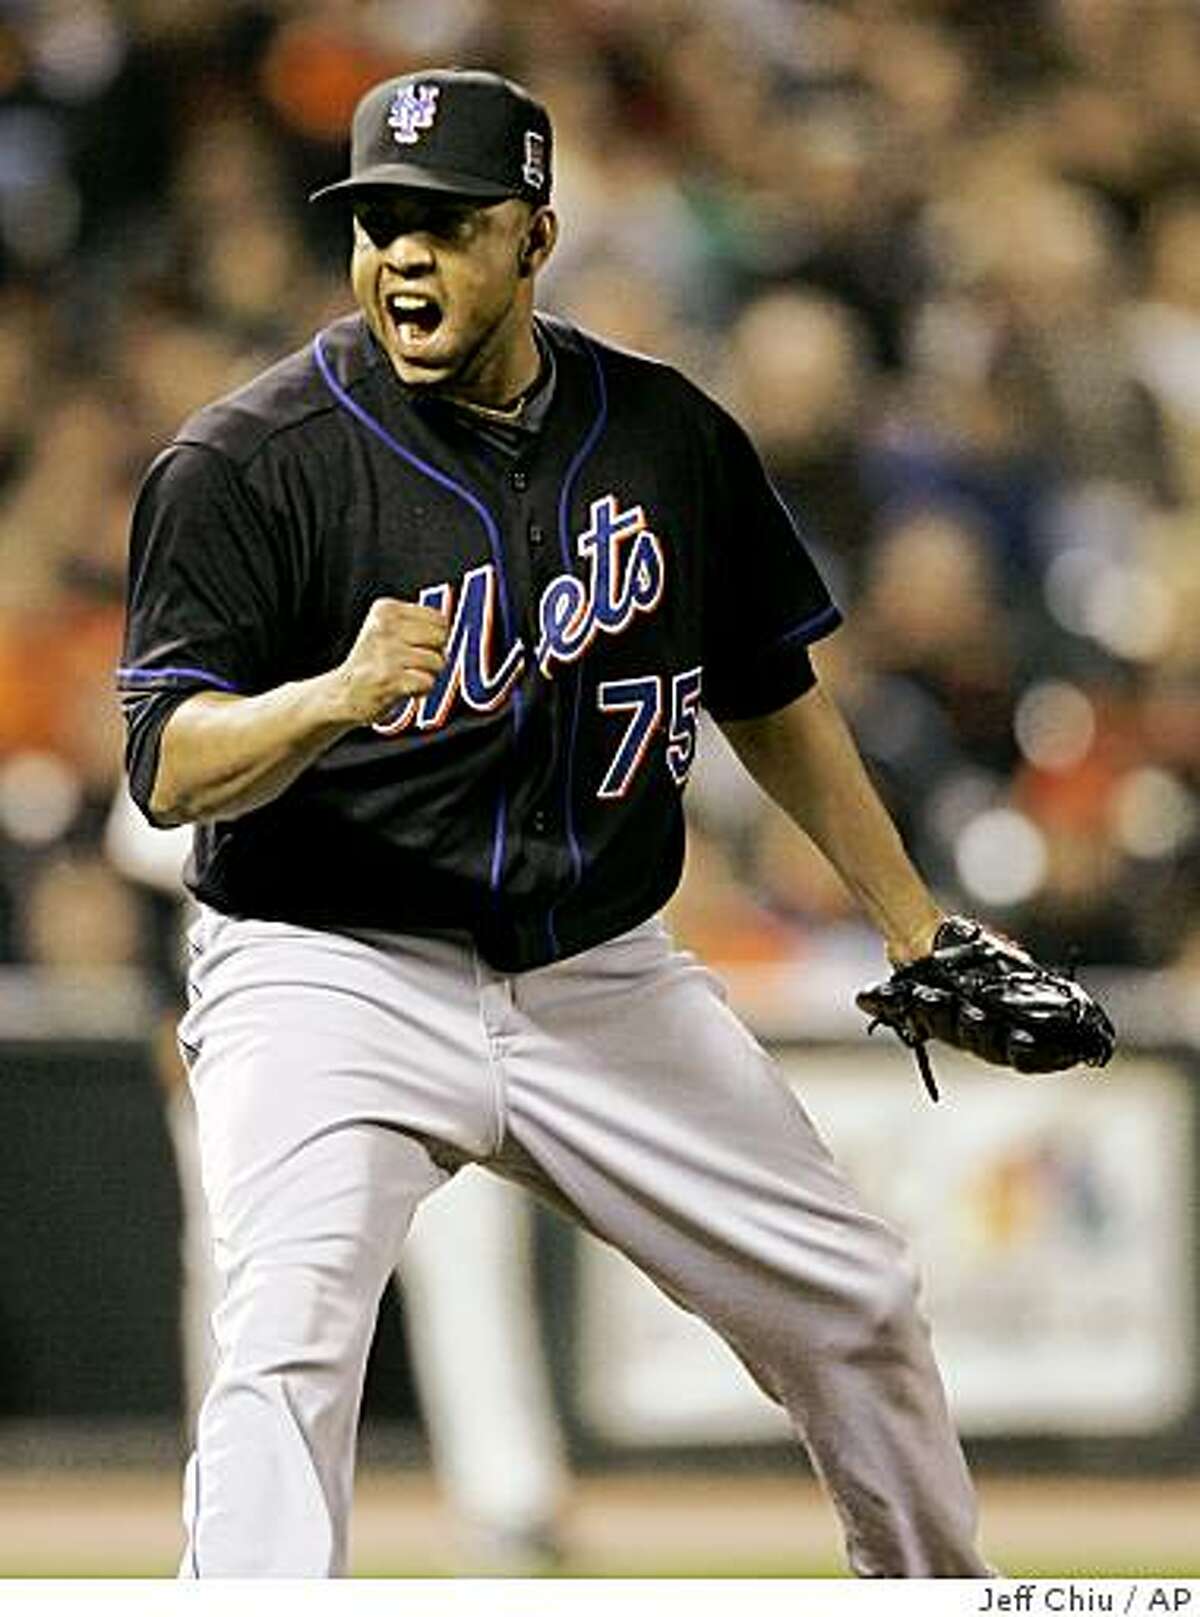 New York Mets' Francisco Rodriguez celebrates after the final out of the ninth inning of a baseball game against the San Francisco Giants in San Francisco, Friday, May 15, 2009. The Mets won 8-6. (AP Photo/Jeff Chiu)